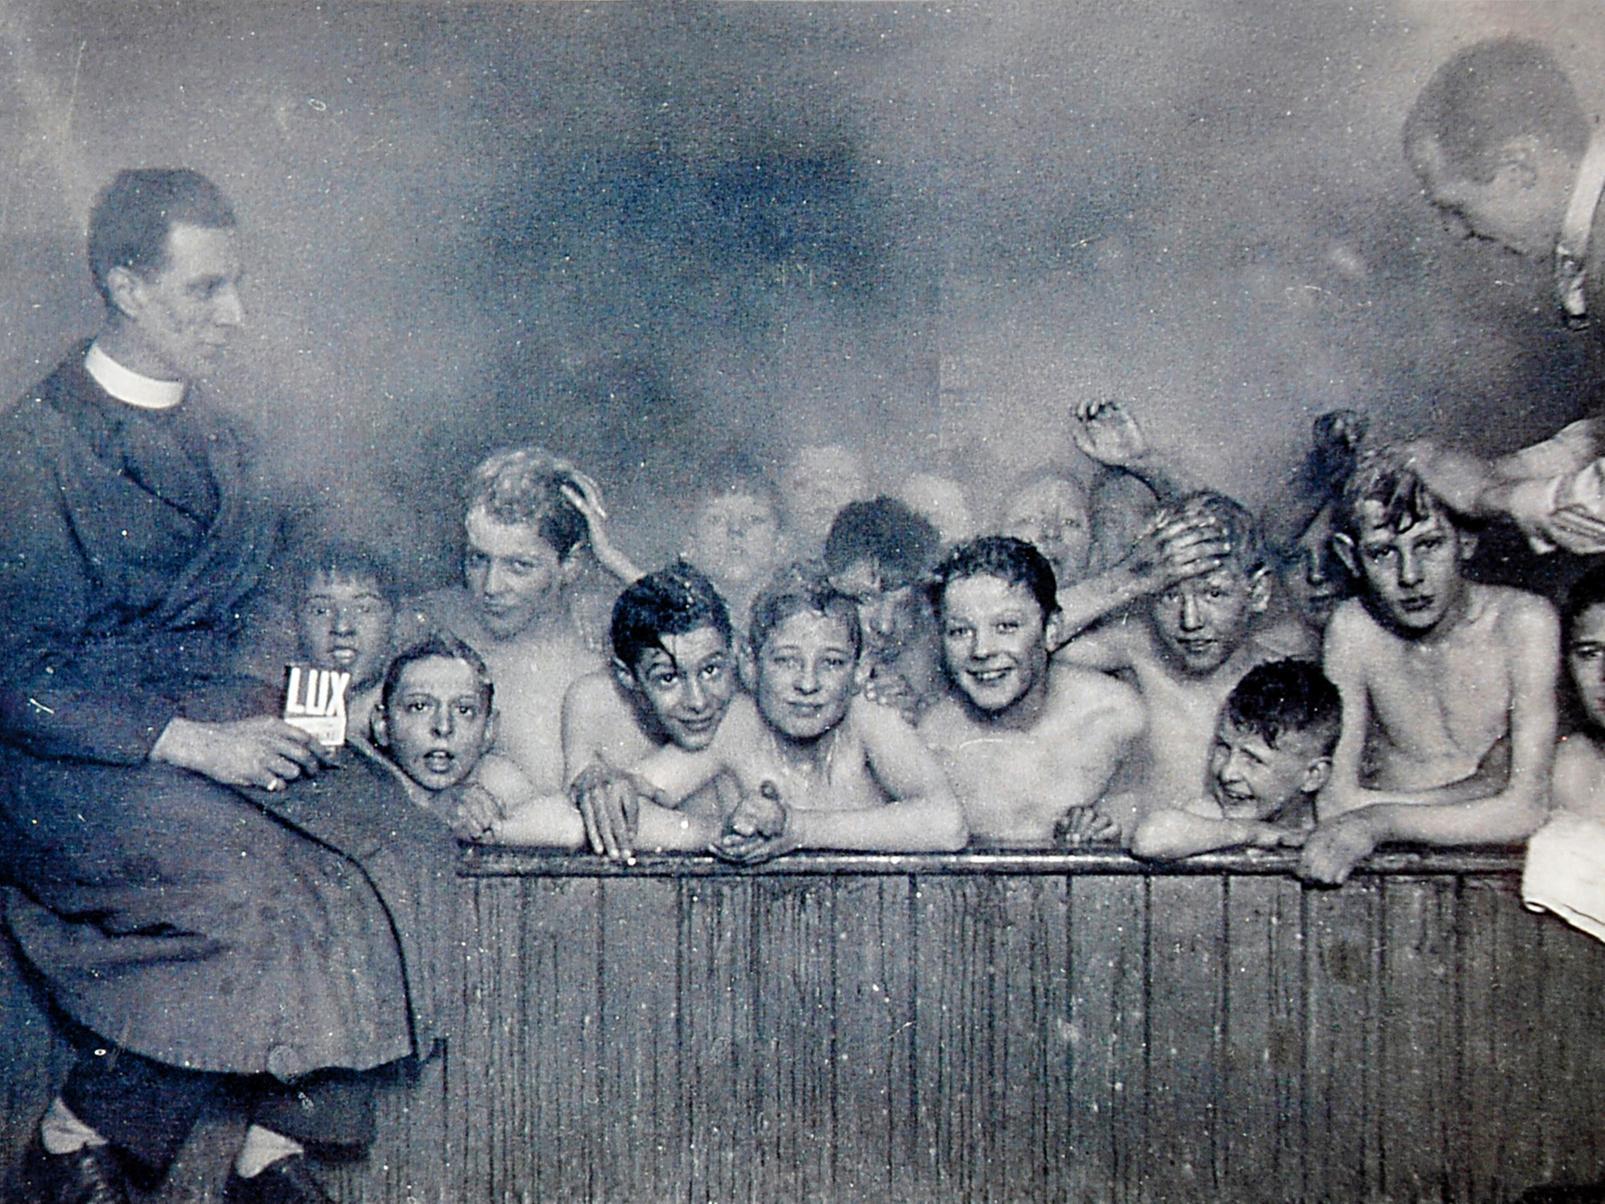 'The Big Bath' at Market District Boy's Club in east Leeds, which provided a weekly bath for lads from the Quarry Hill area who had no mod cons.